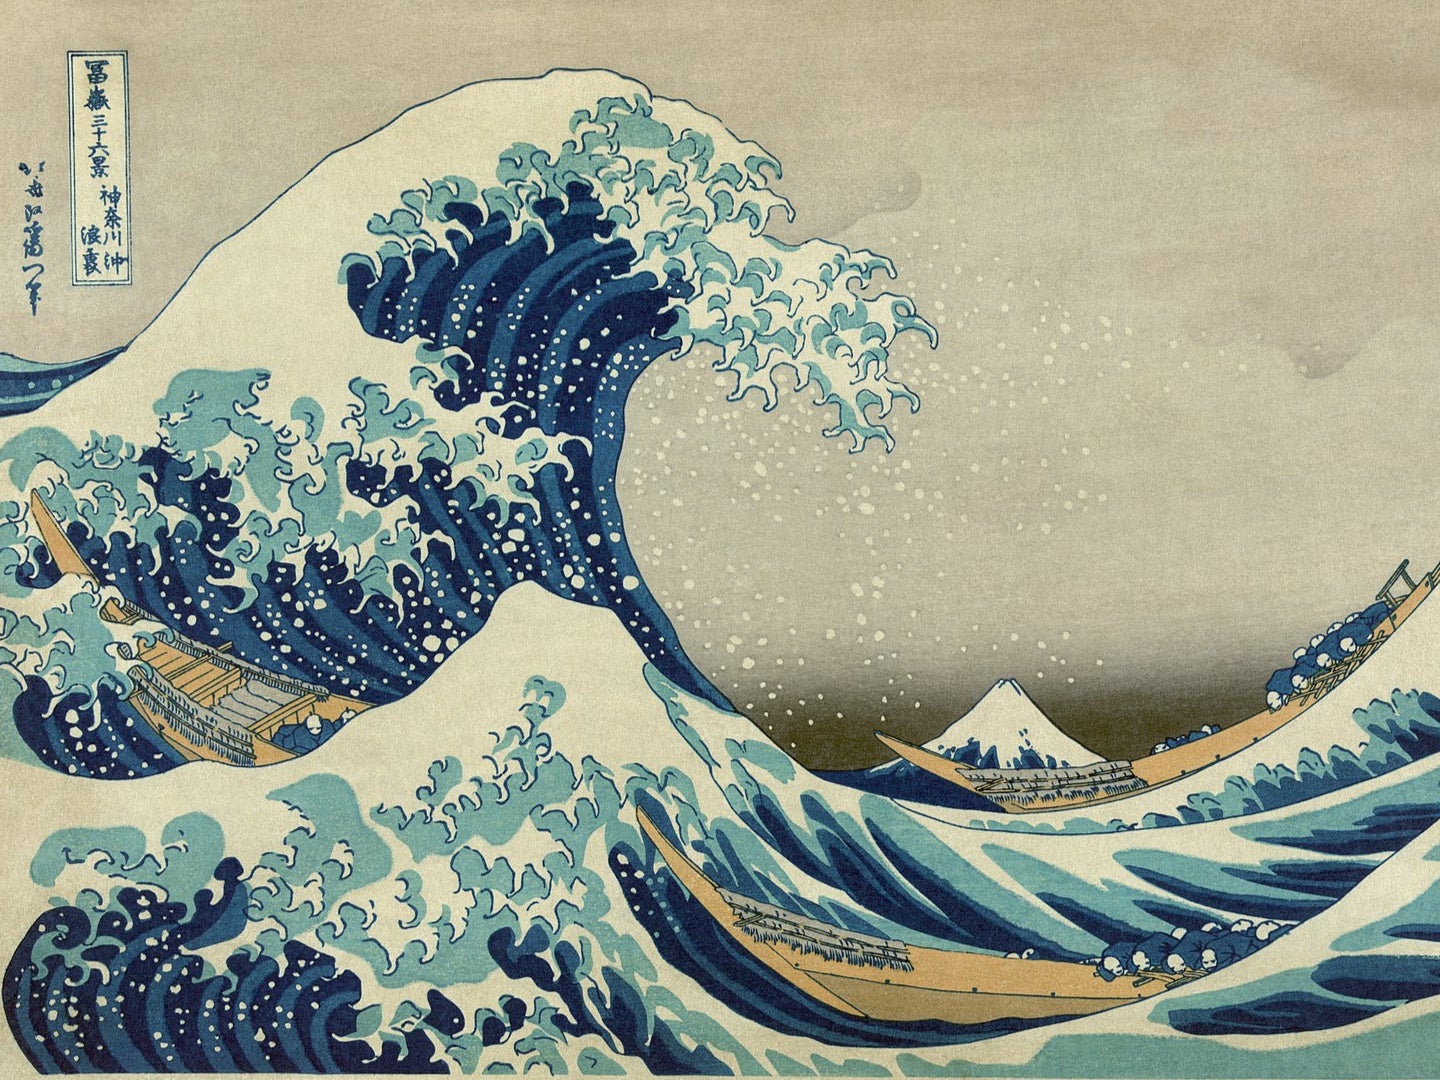 Published at around the same time as Hokusai was producing the 103 recently rediscovered drawings, The Great Wave is the artist's most famous painting